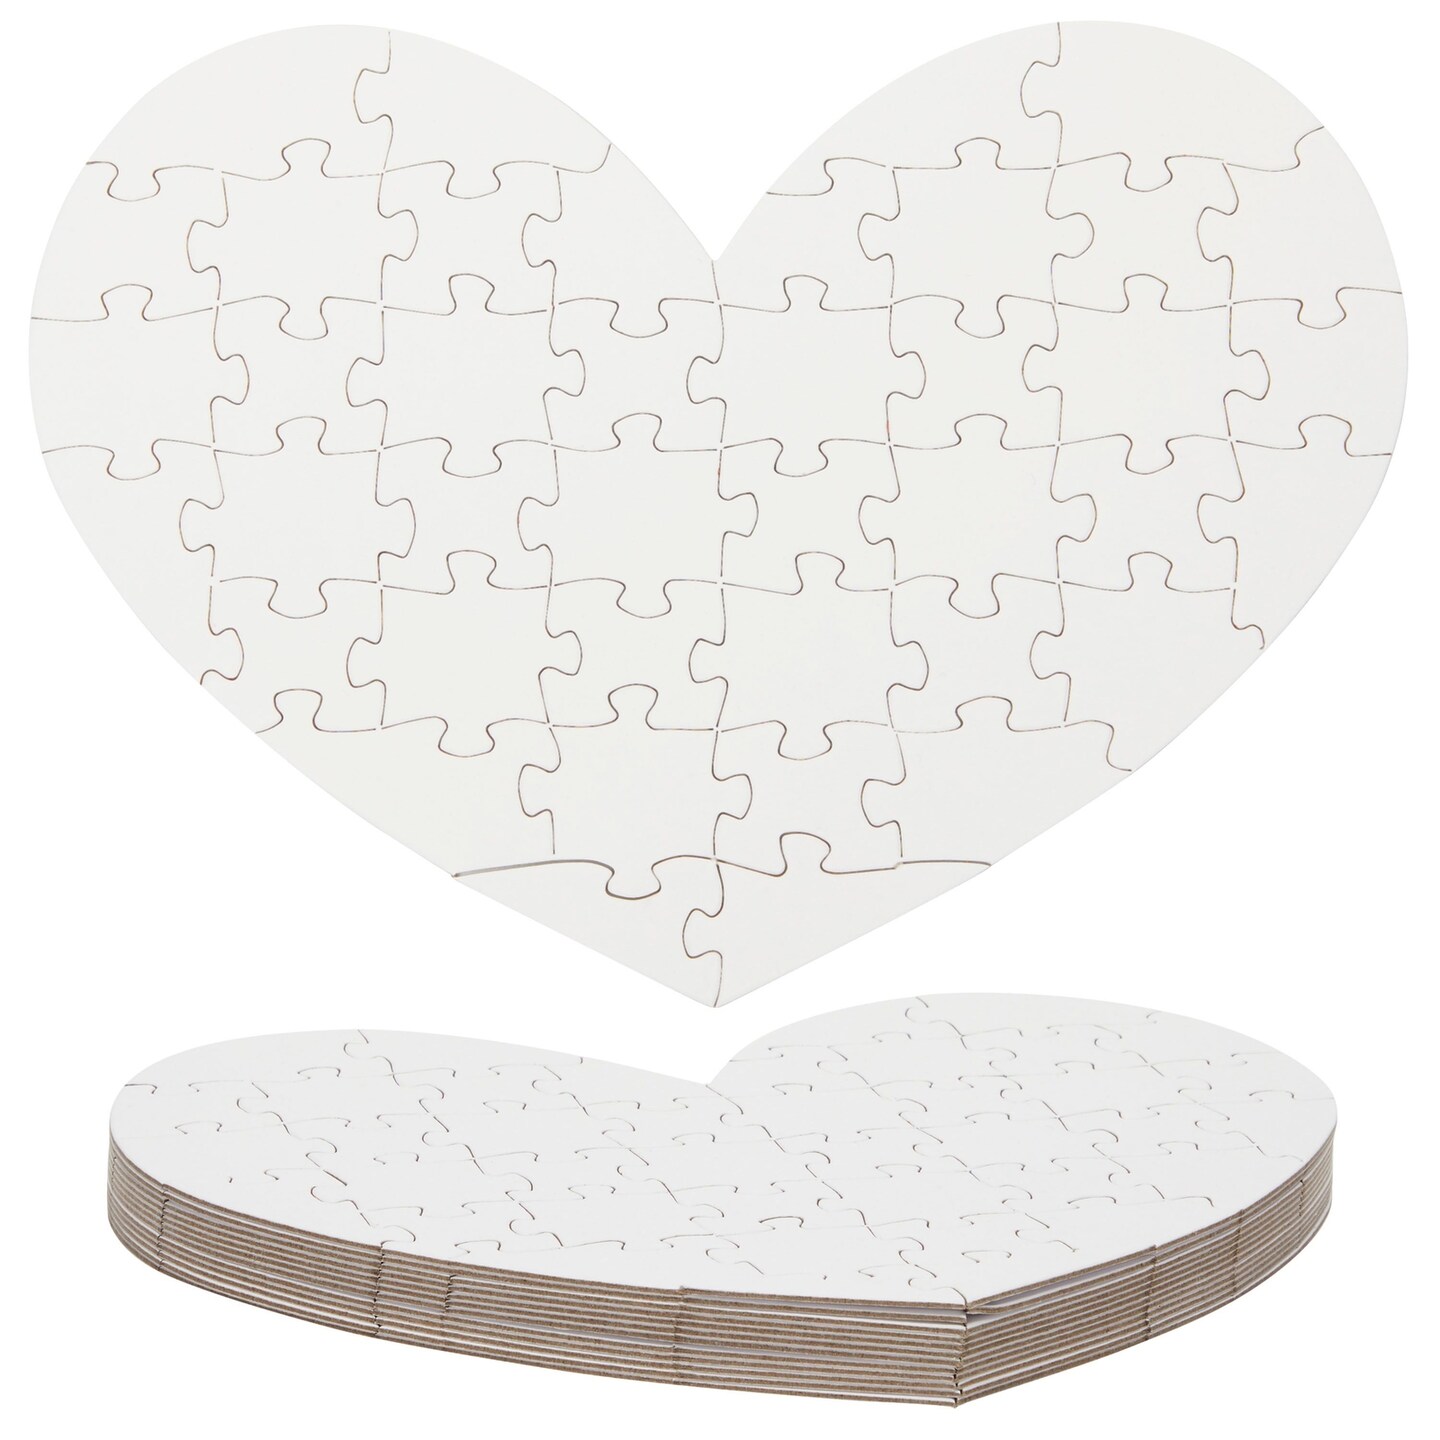 Set of 12 Heart Shaped Blank Jigsaw Puzzles to Draw On for Valentine's, DIY  Crafts (9 x 6 in, 40 Pieces Each